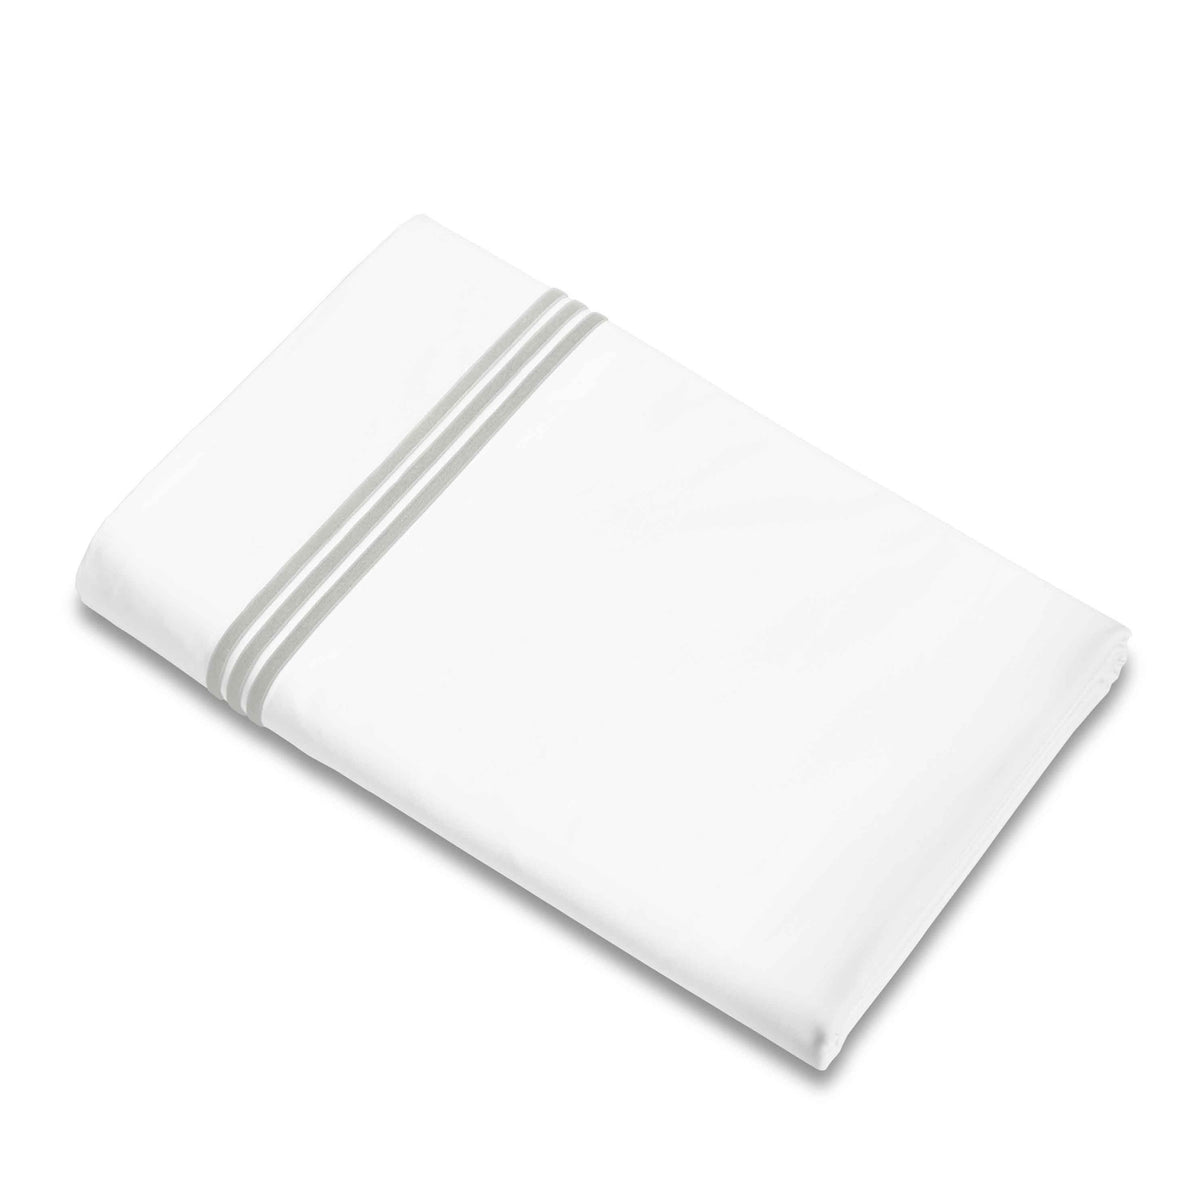 Flat Sheet of Signoria Platinum Percale Bedding in White/Pearl Color